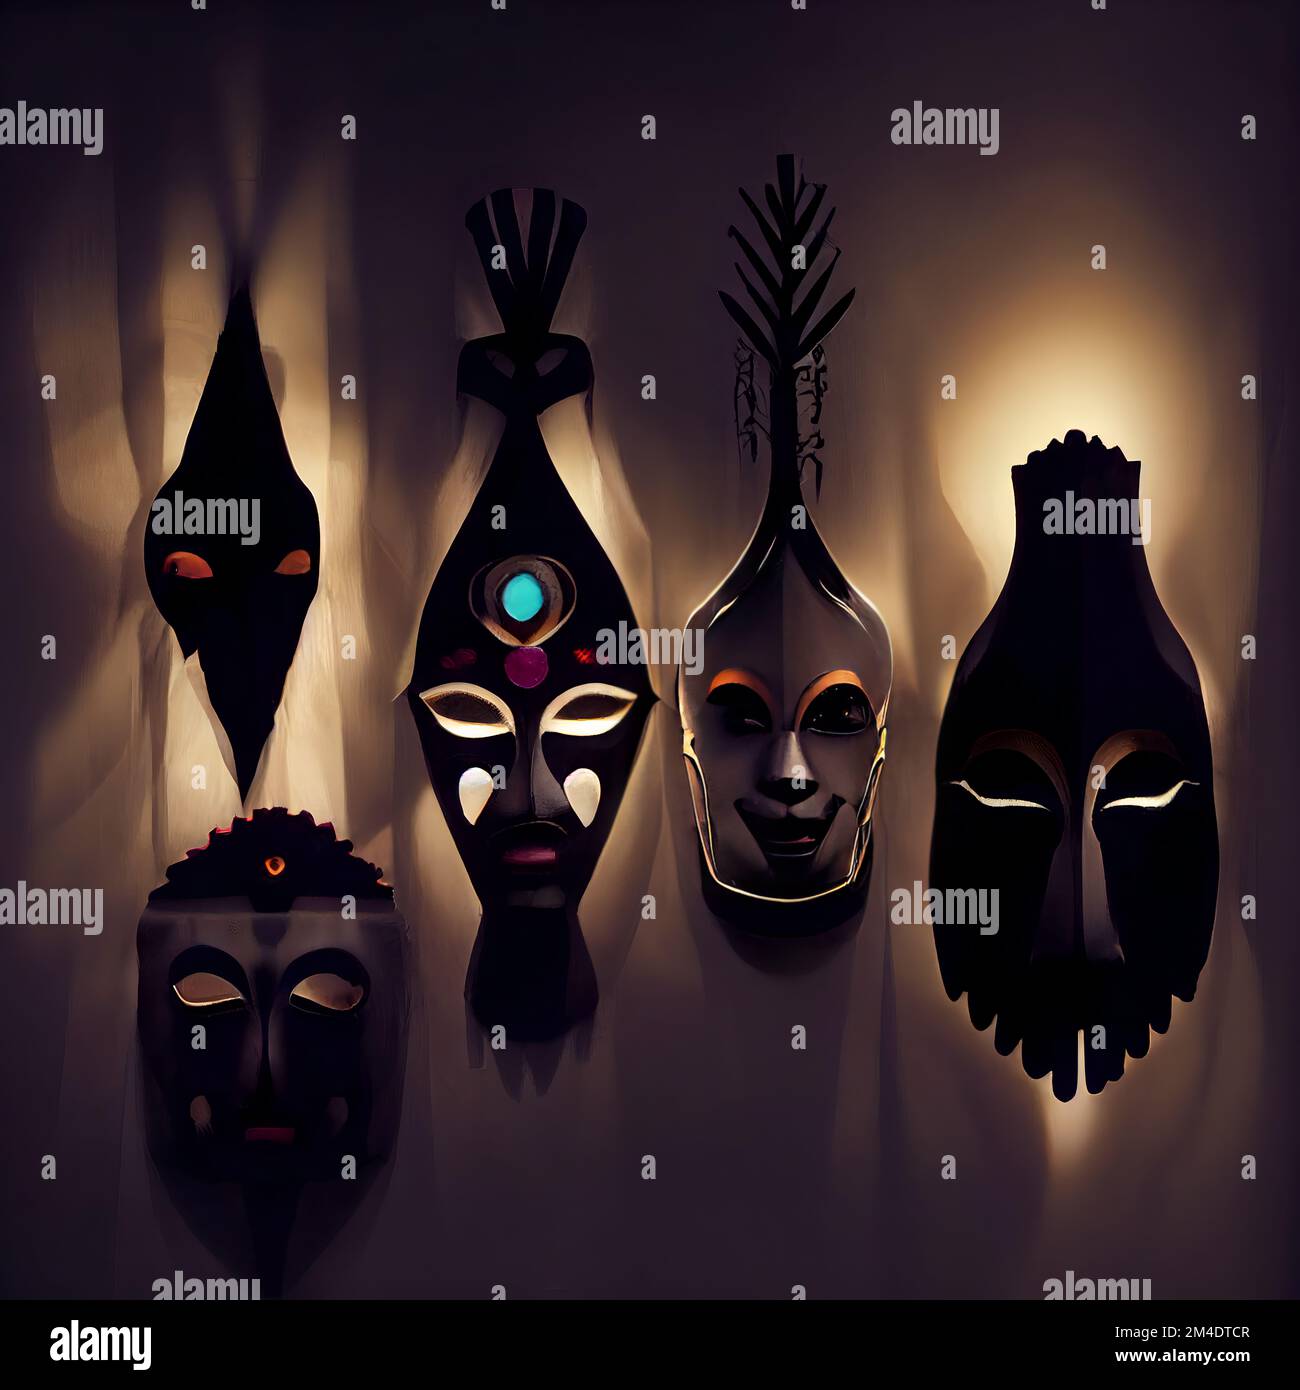 Masks of the Spirits, close to Nature and expressing identity Stock Photo